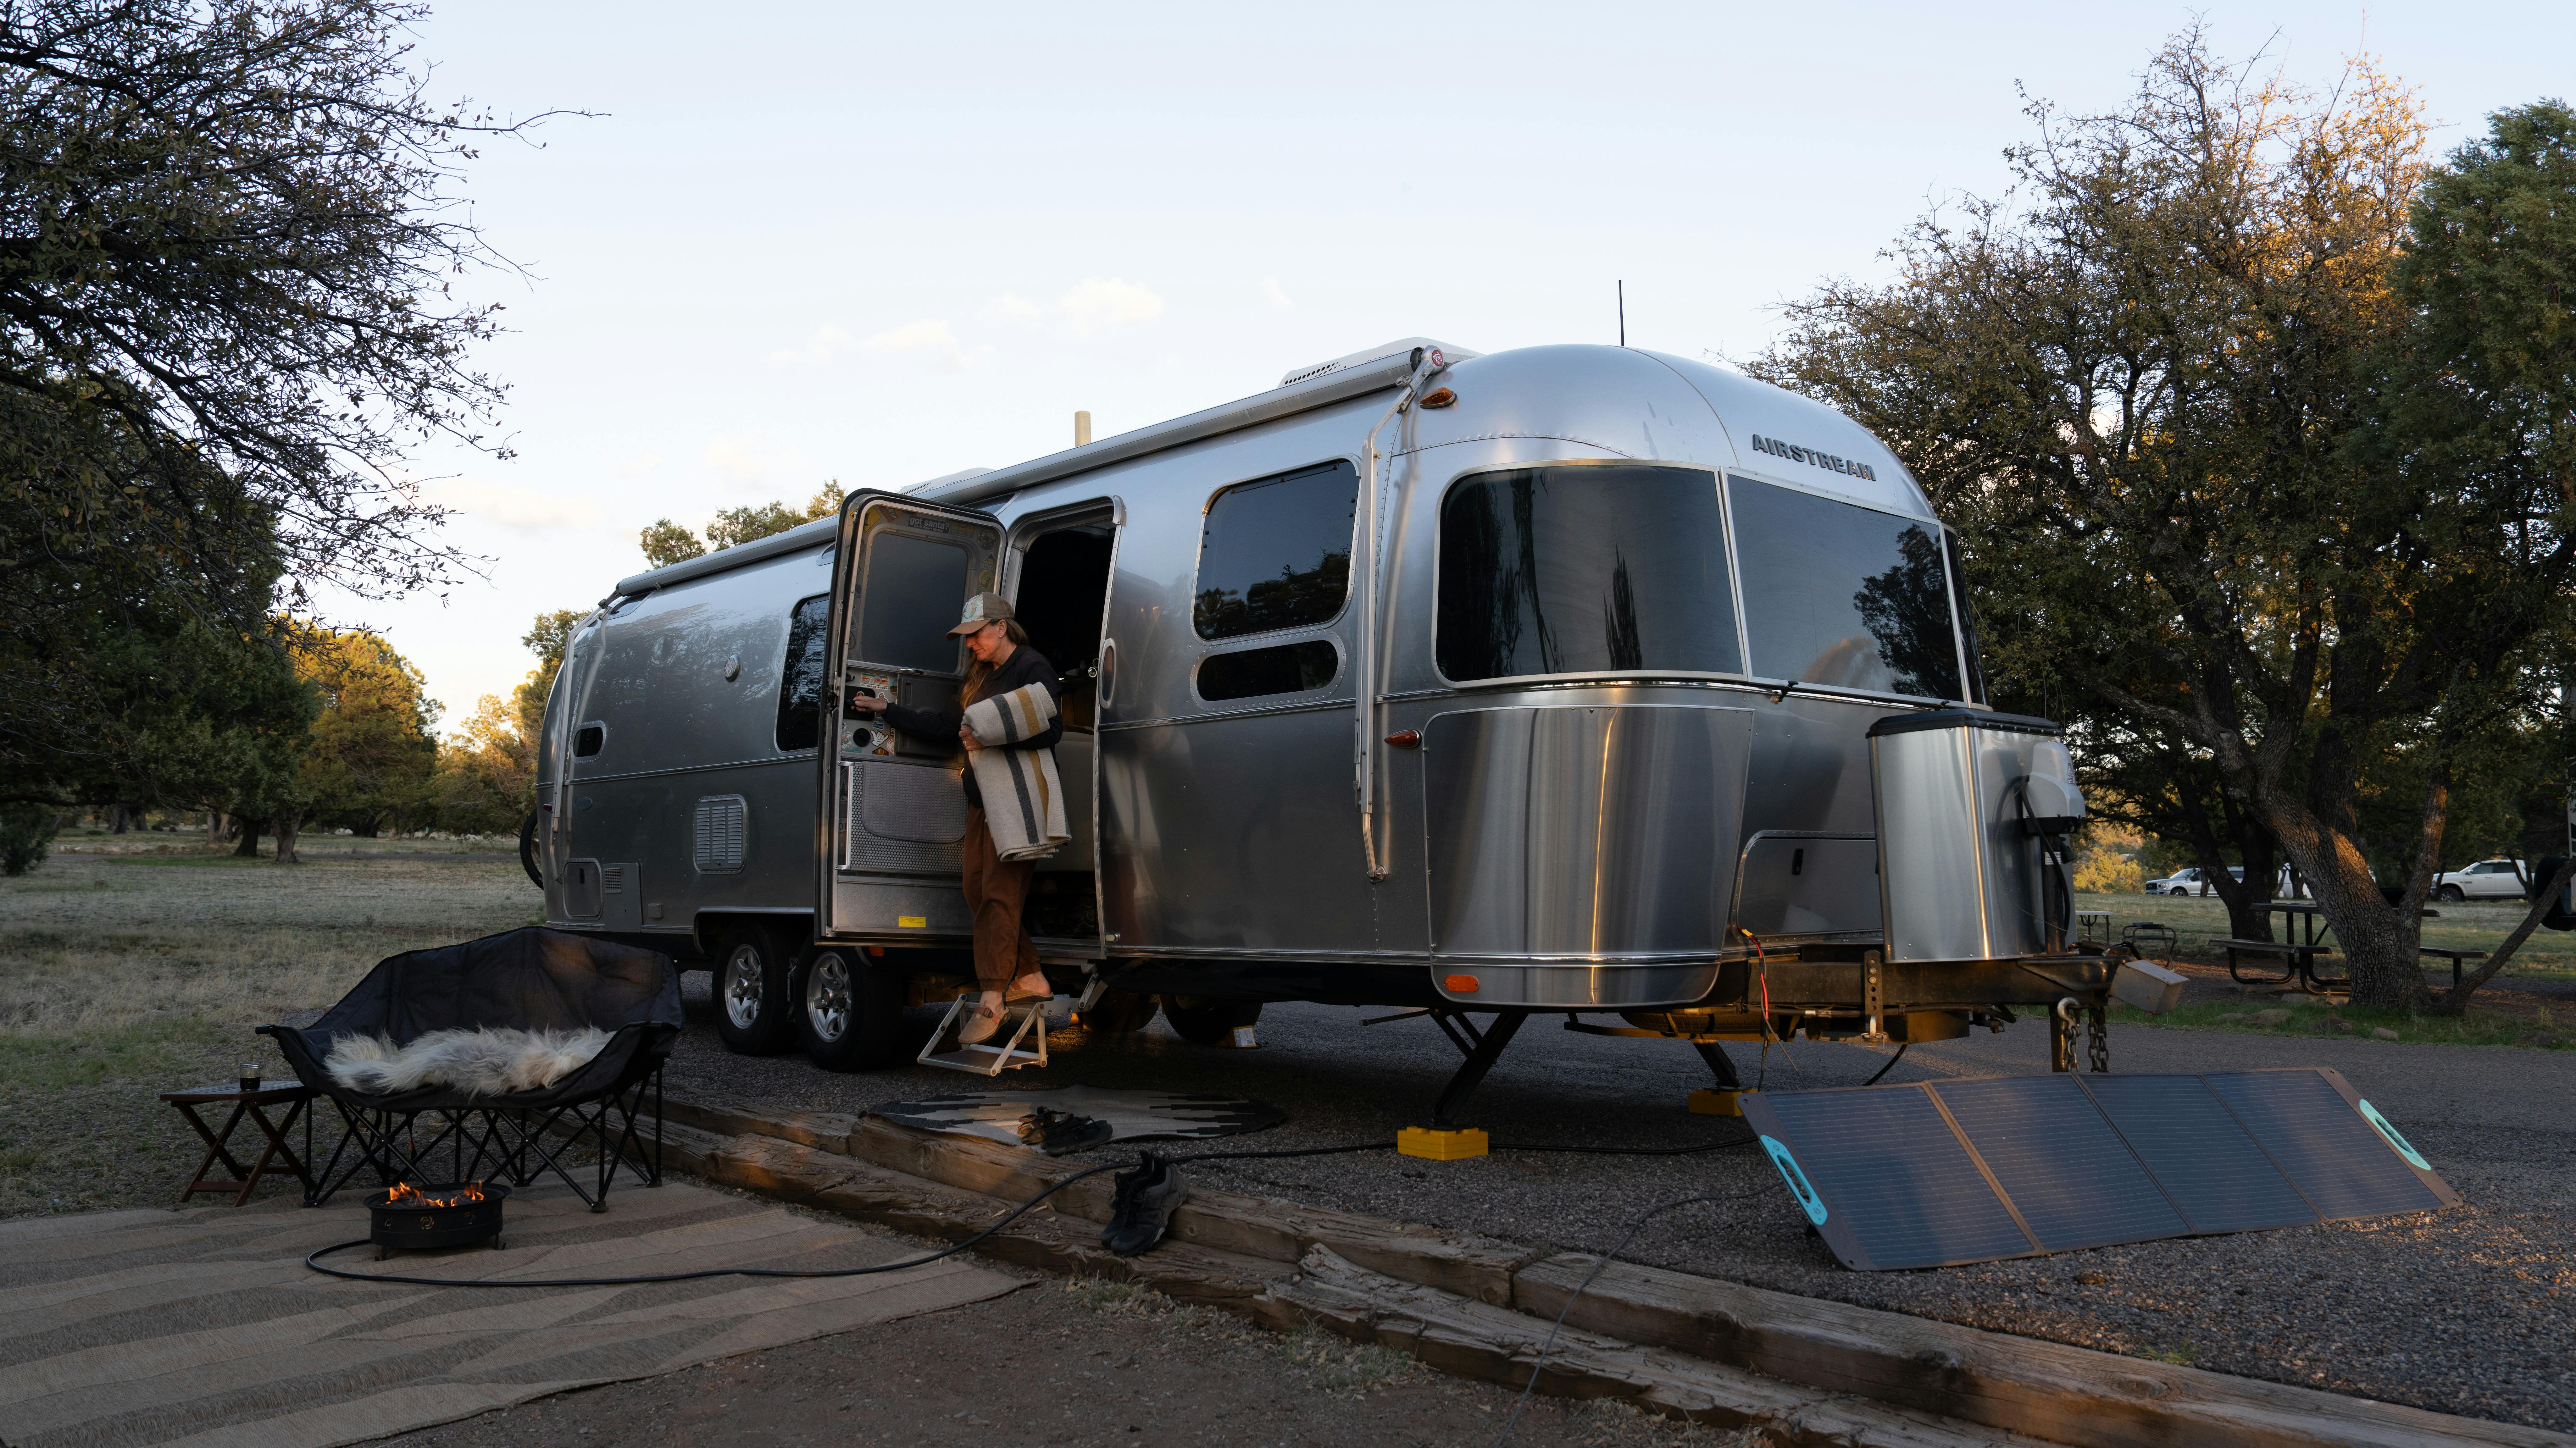 Karen Blue stepping out the door of her Airstream Flying Cloud travel trailer.